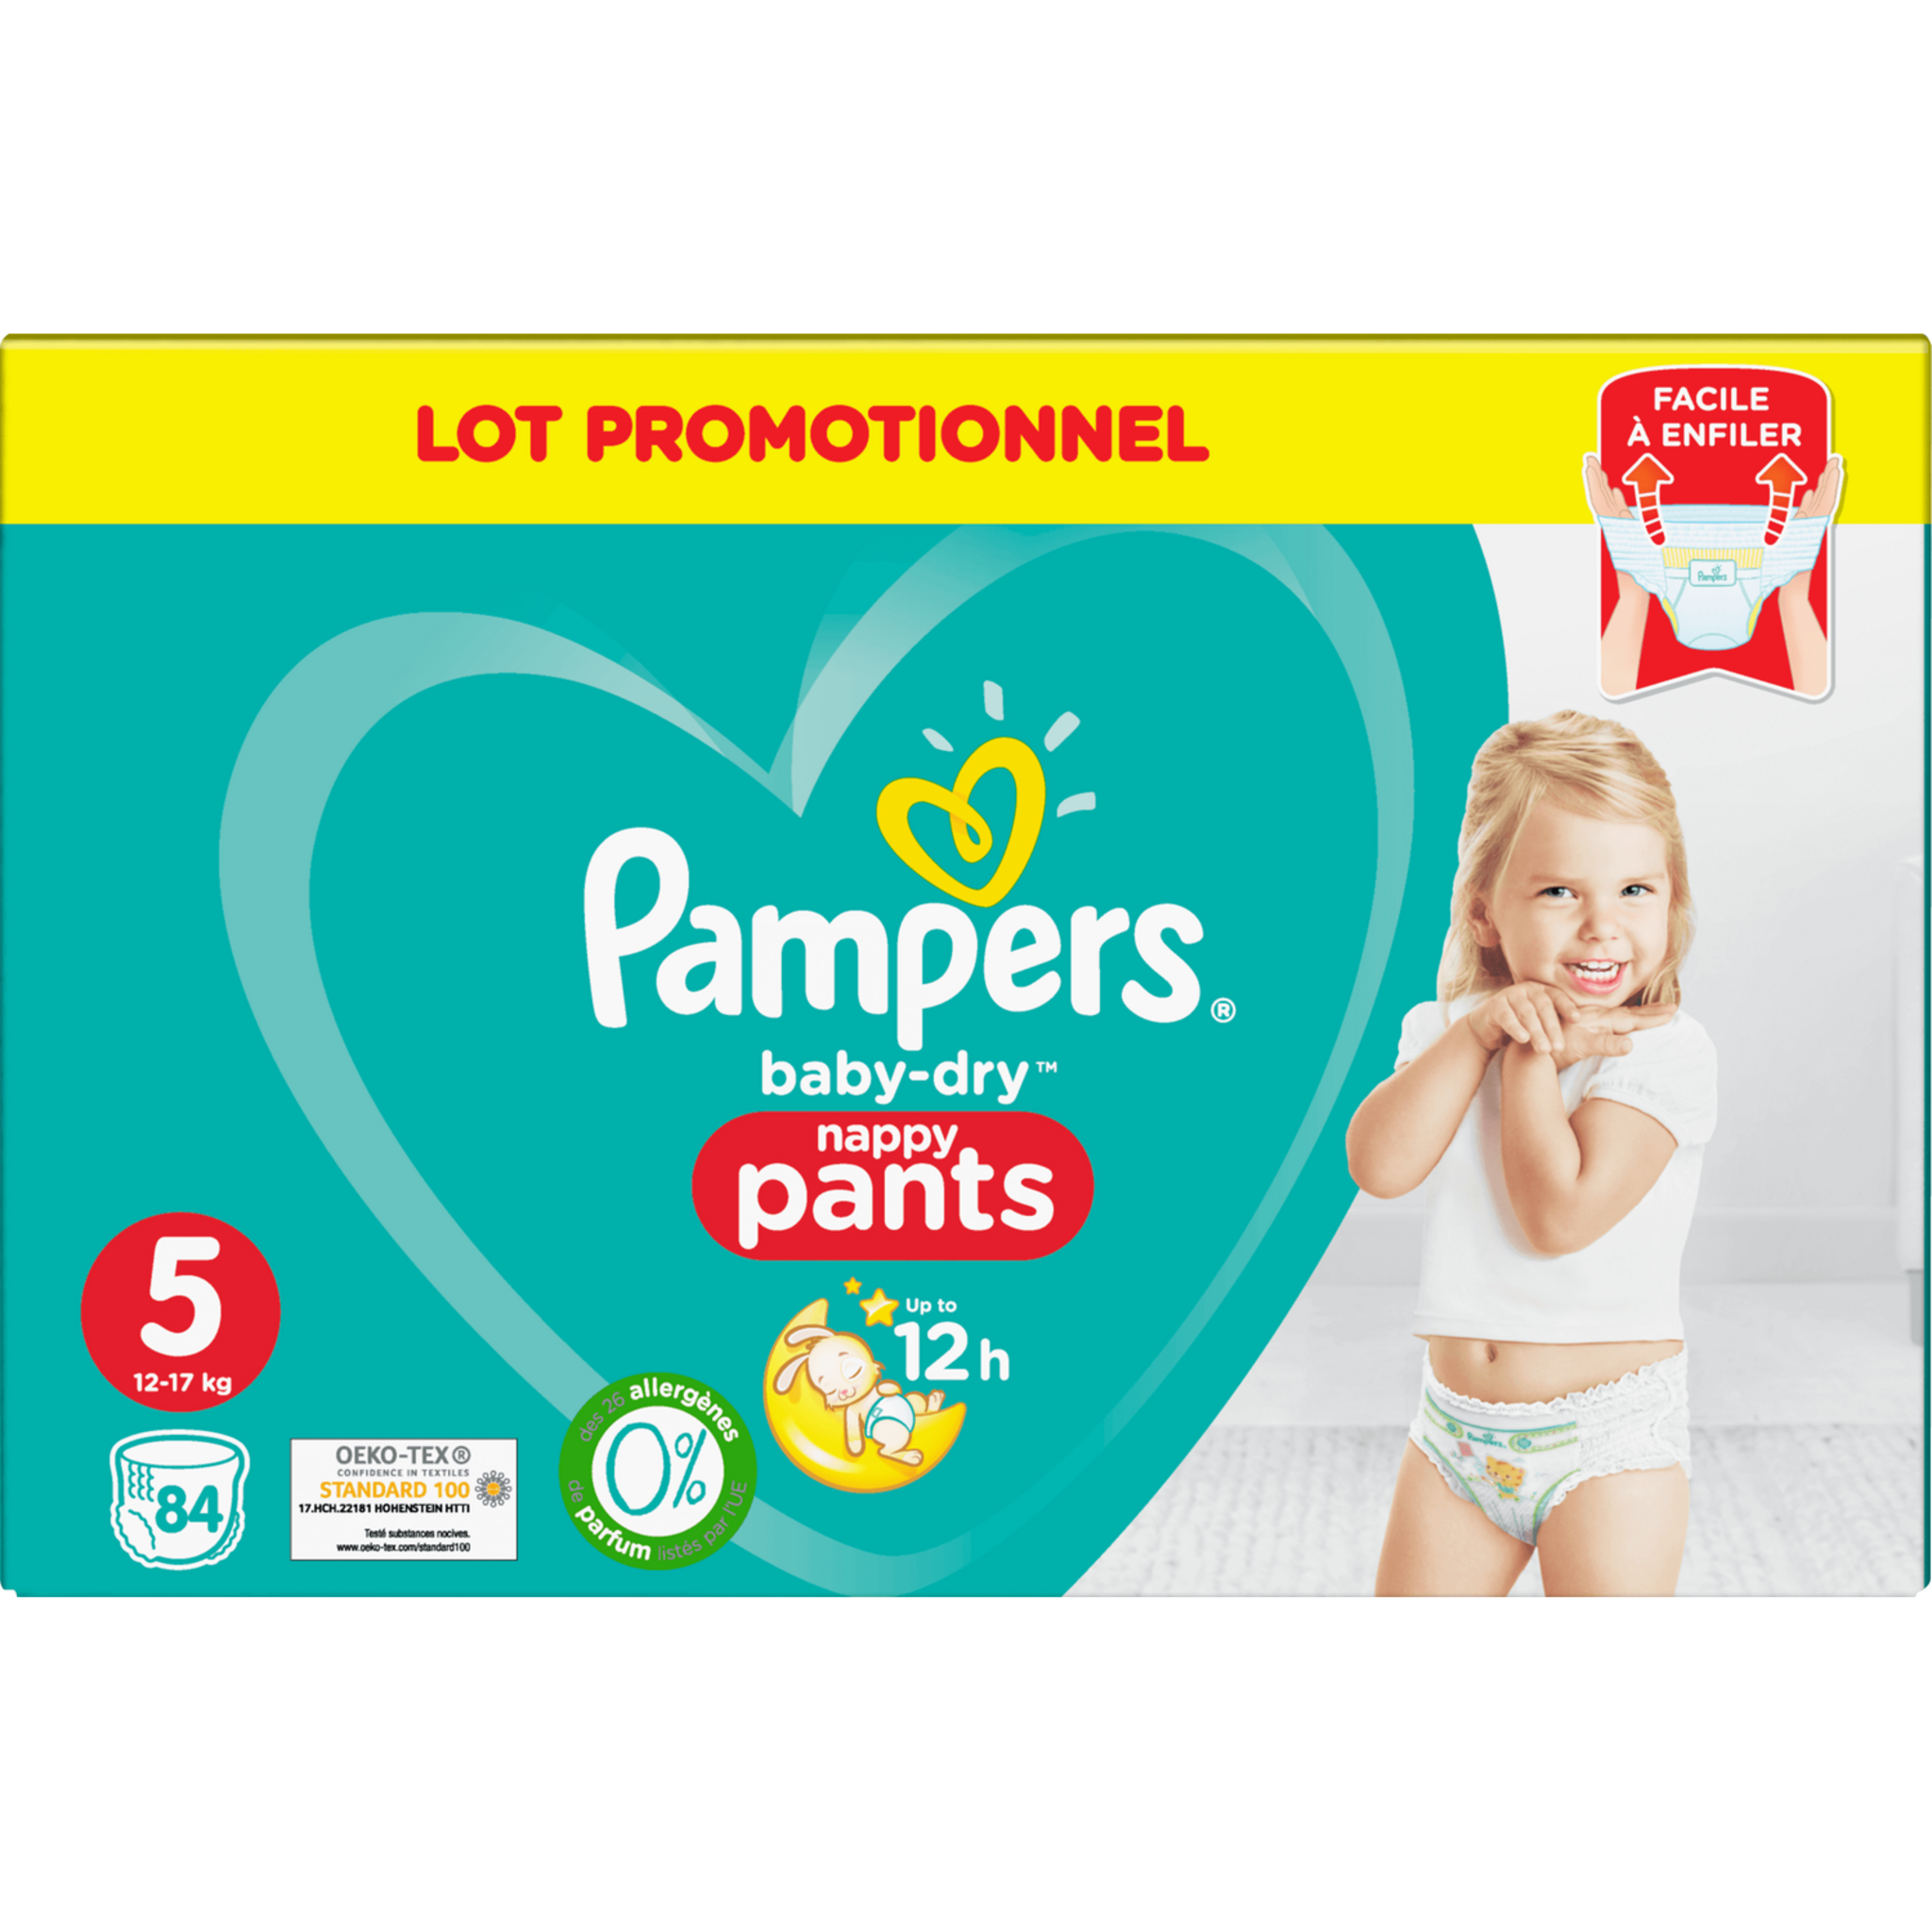 Pampers - Baby dry nappy pants - Taille 5 - 21 couches